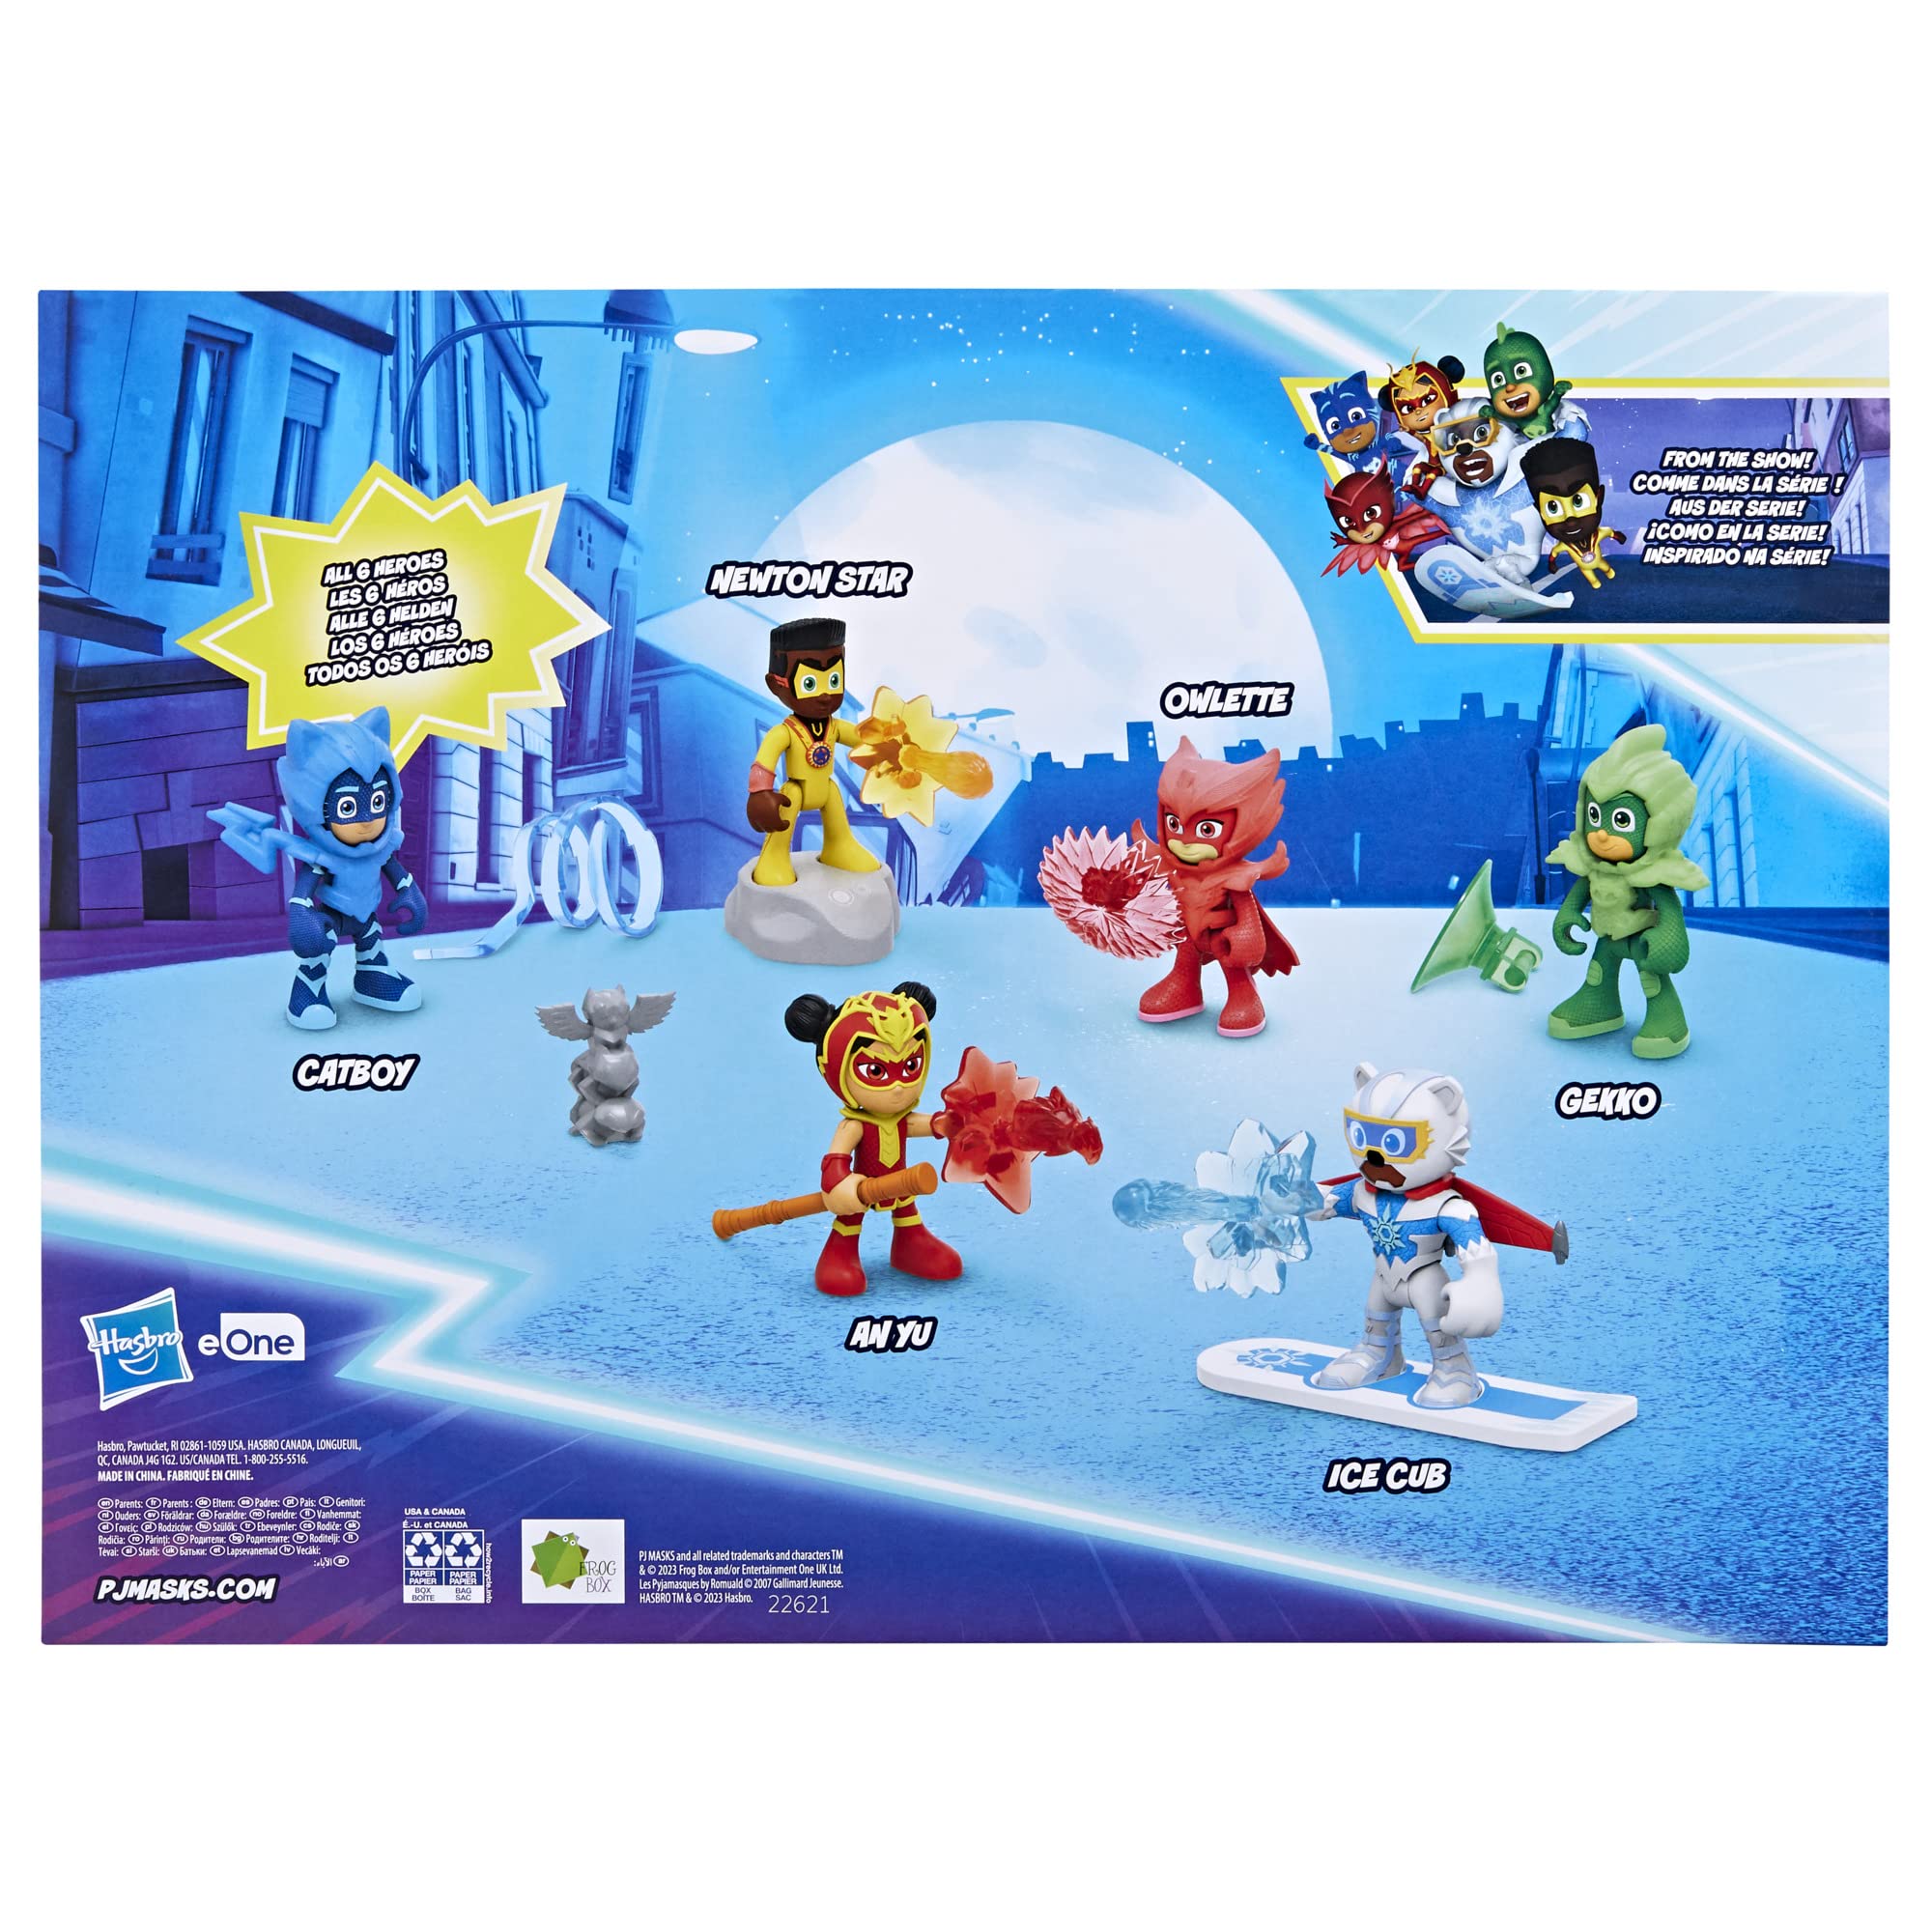 PJ Masks Power Heroes Meet The Power Heroes Figure Set with 6 Figures and 14 Accessories, Preschool Toys for Kids 3 Years and Up